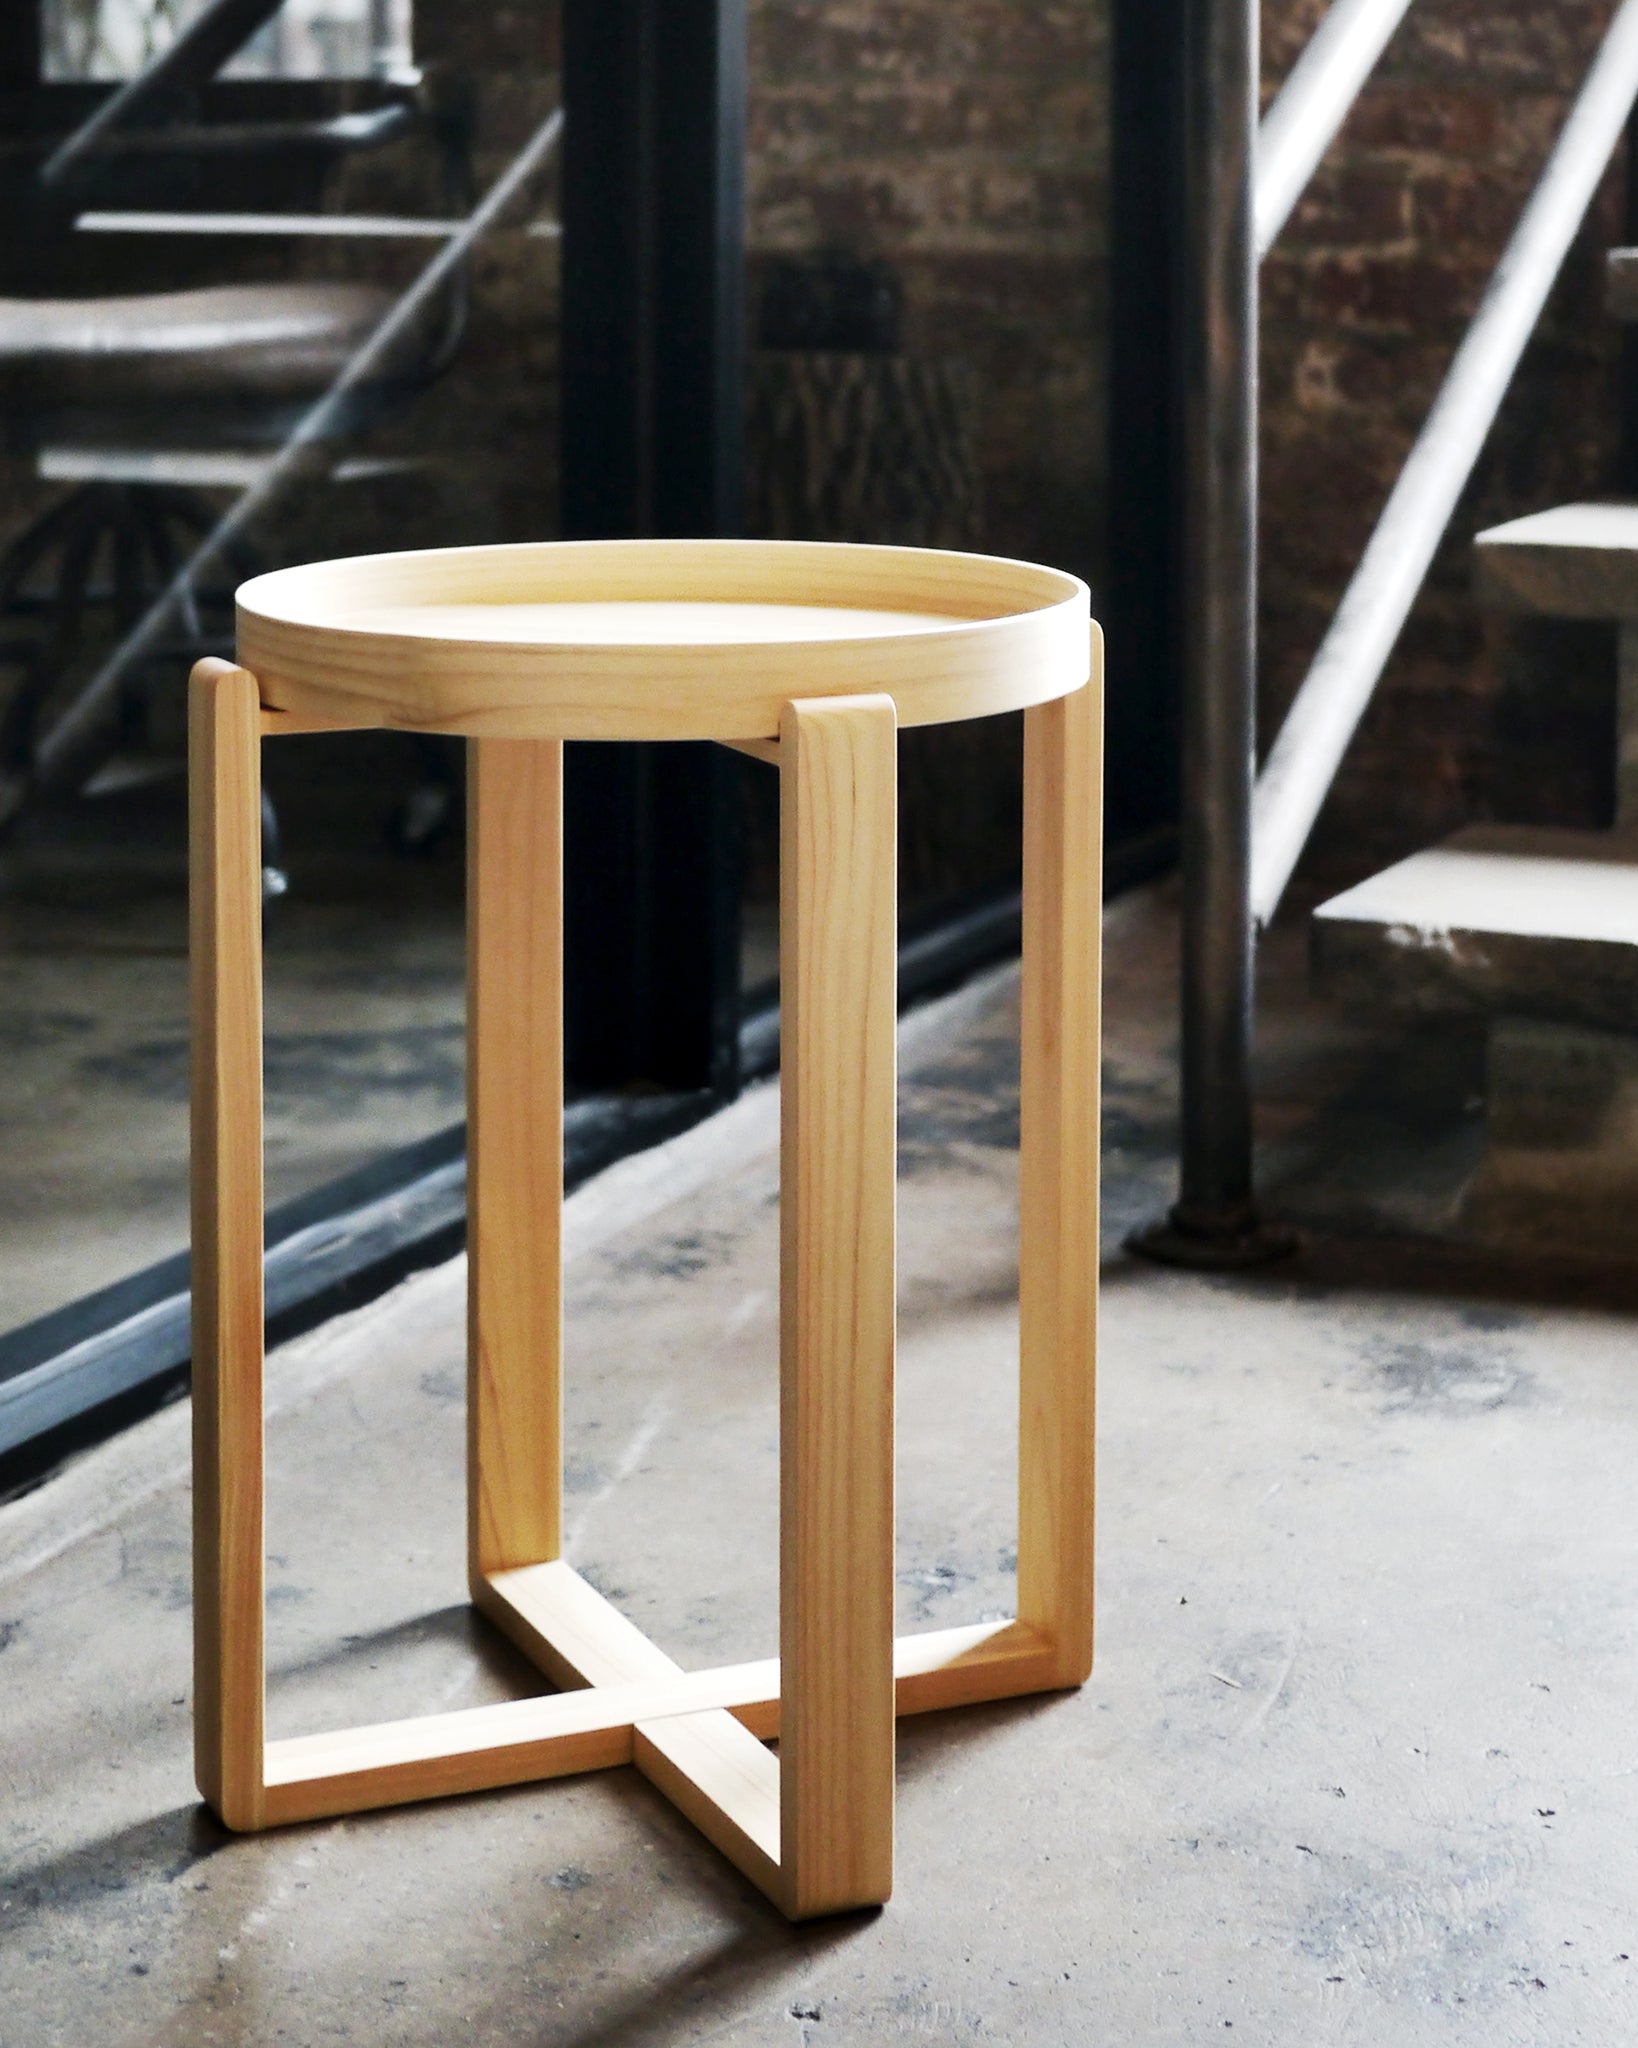 Hinoki magewa tray table placed on a cement floor, with dark brick wall and steel frames and stairs in the background.